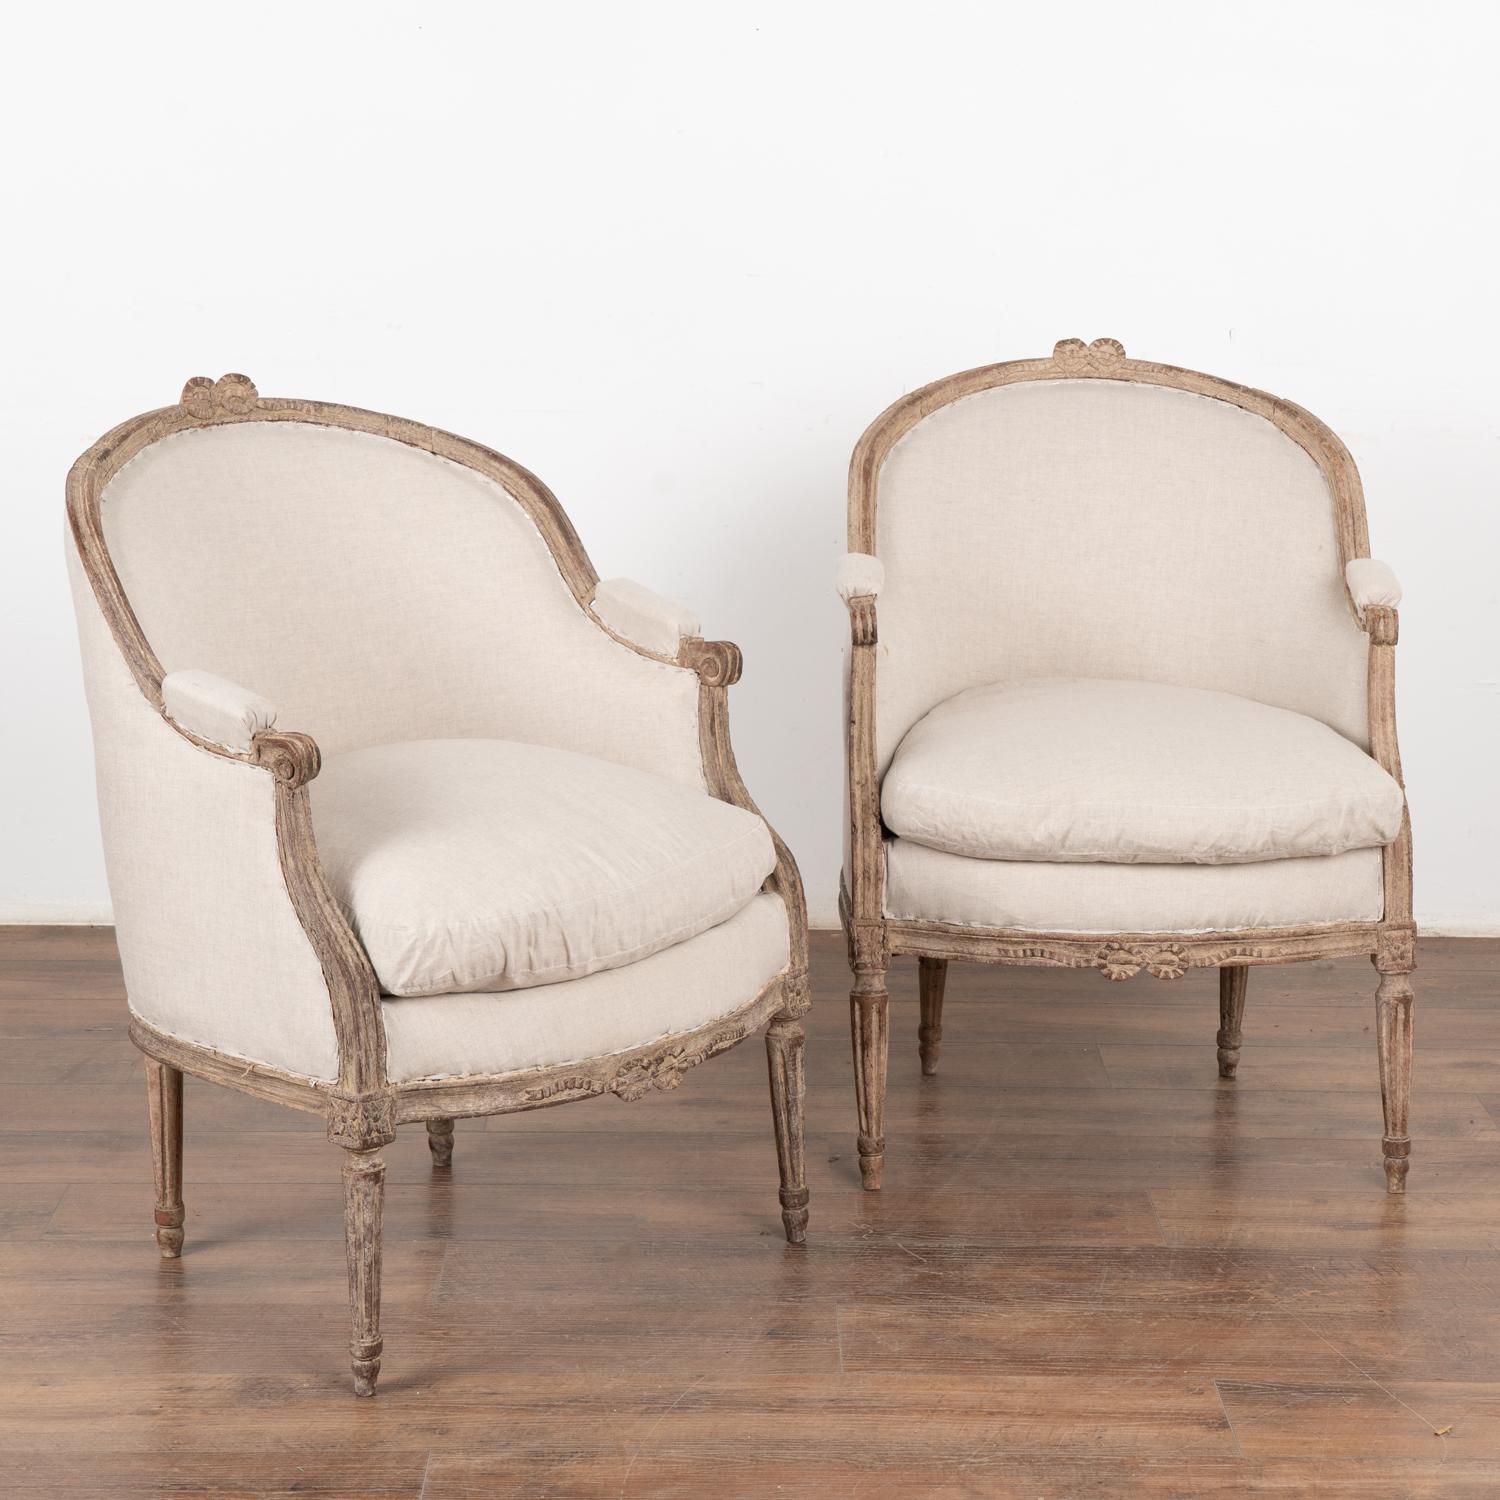 Pair, attractive Swedish country Gustavian style arm chairs with gently curved barrel back and carved ribbon/bow adorning the back and skirt. Turned fluted feet.
Newer, professionally applied layered antique white painted finish has been distressed